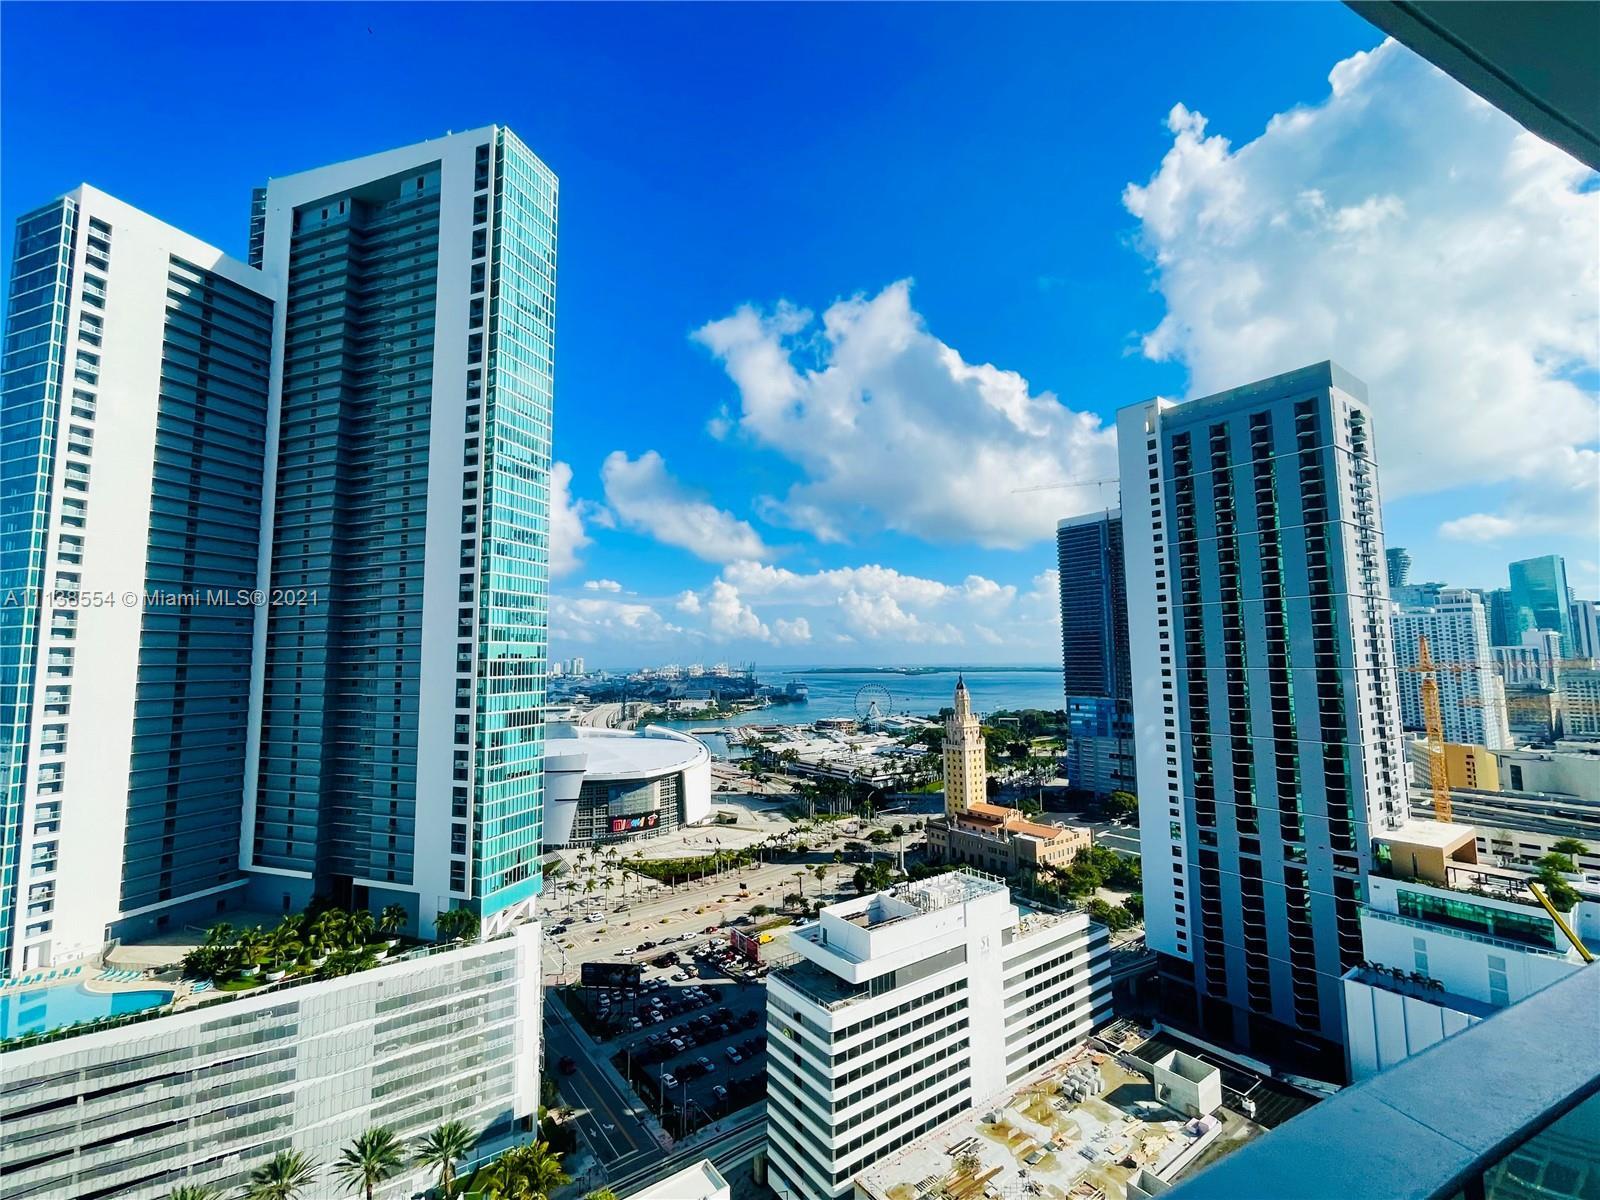 SPECTACULAR 2 BED 3 BATH PLUS DEN AT THE PARAMOUNT MIAMI WORLDCENTER. SPLIT FLOOR PLAN RESIDENCE WIT